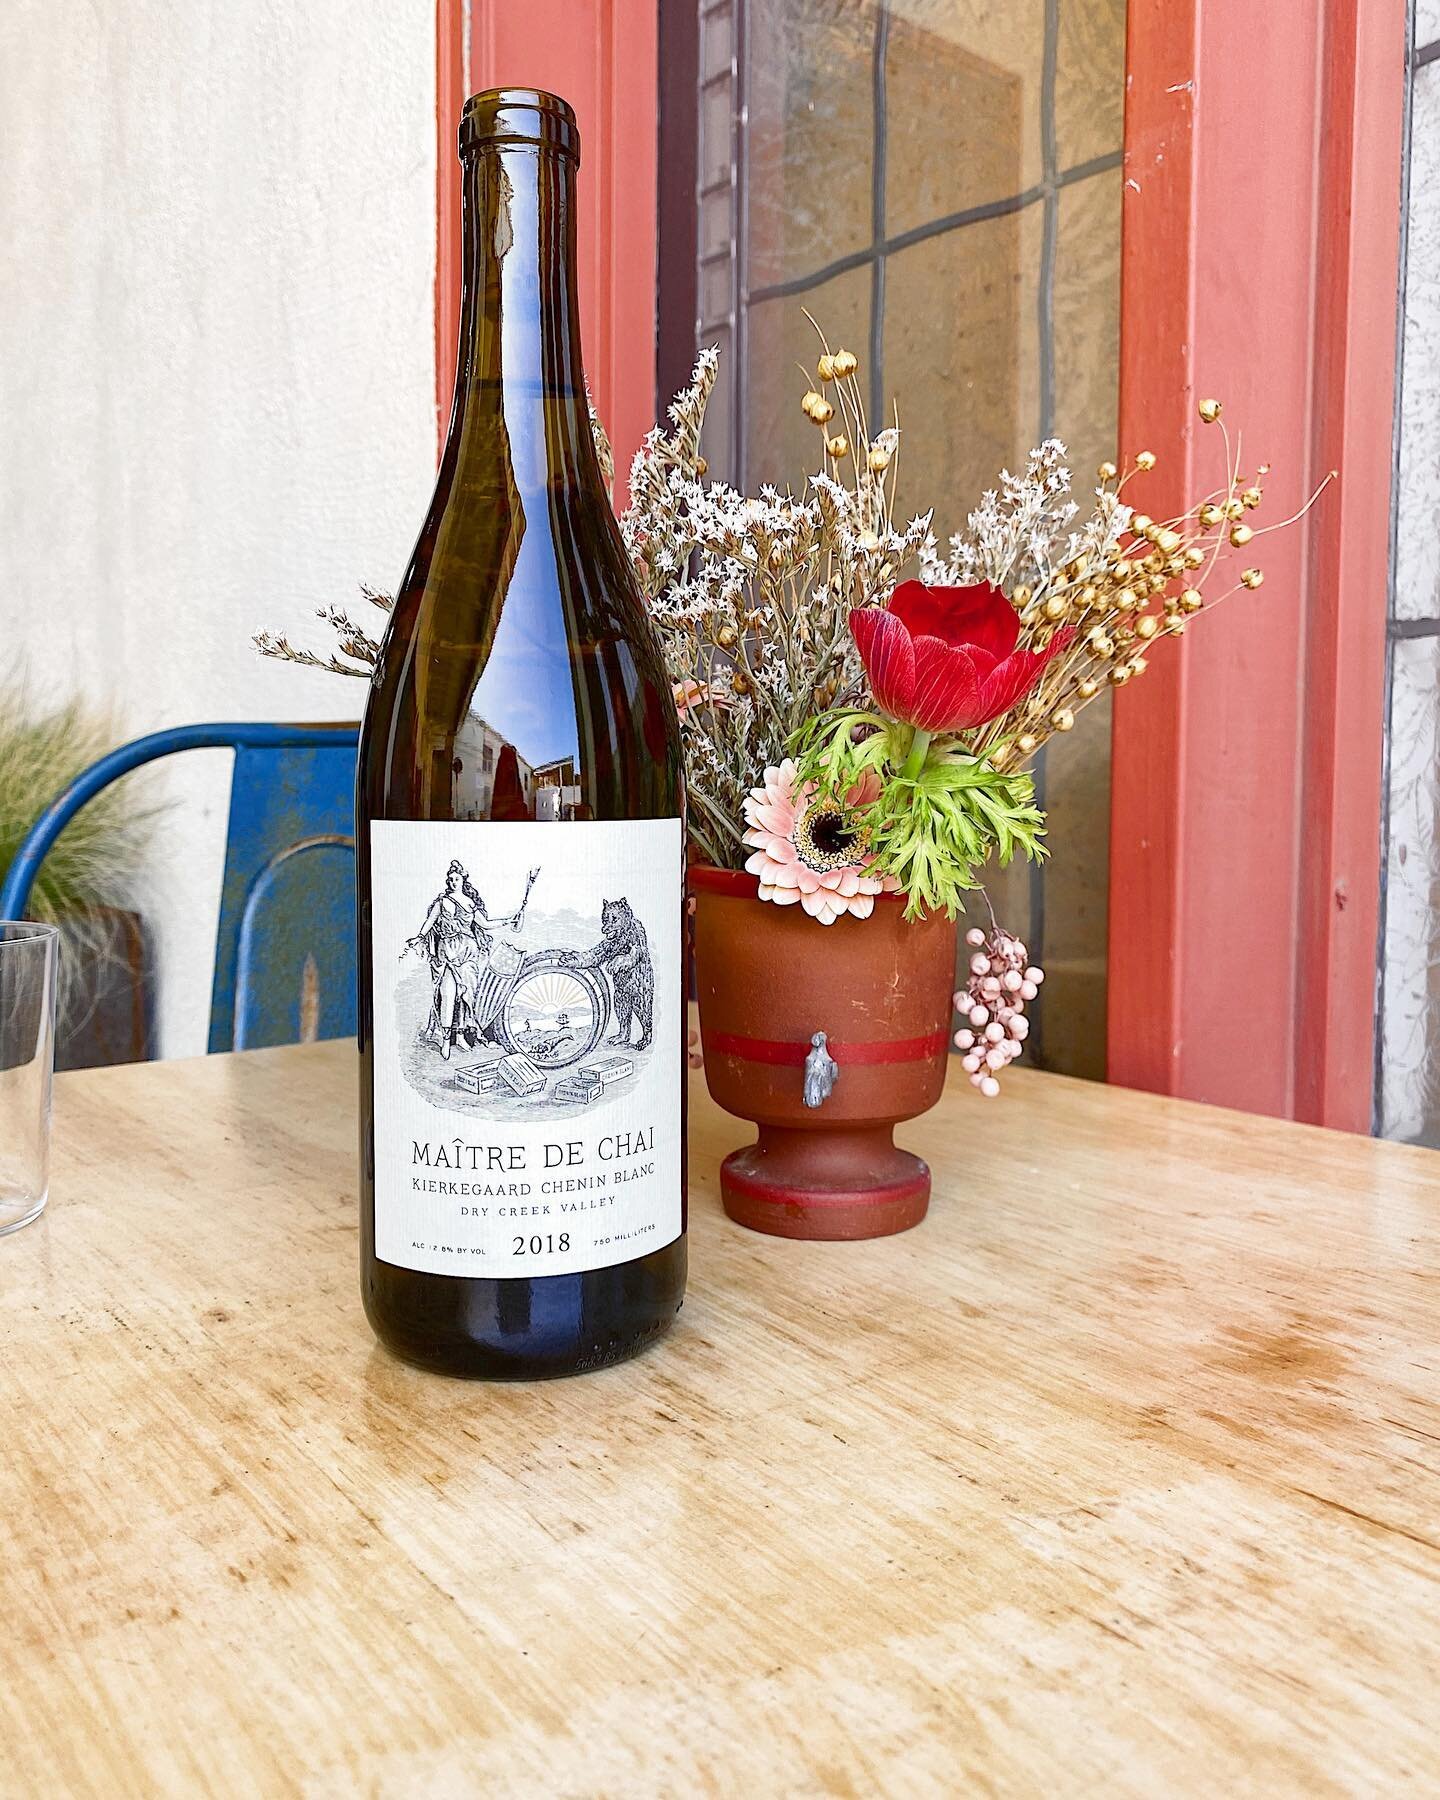 68&deg; &amp; 🔆 today! Swing by the tasting room and soak up the remainder of the weekend with us. Larder is stocked &amp; we have plenty of options for bottles to-go. 
⠀⠀⠀⠀⠀⠀⠀⠀⠀
We&rsquo;re also offering 20% off of our 2018 Kierkegaard Chenin Blanc